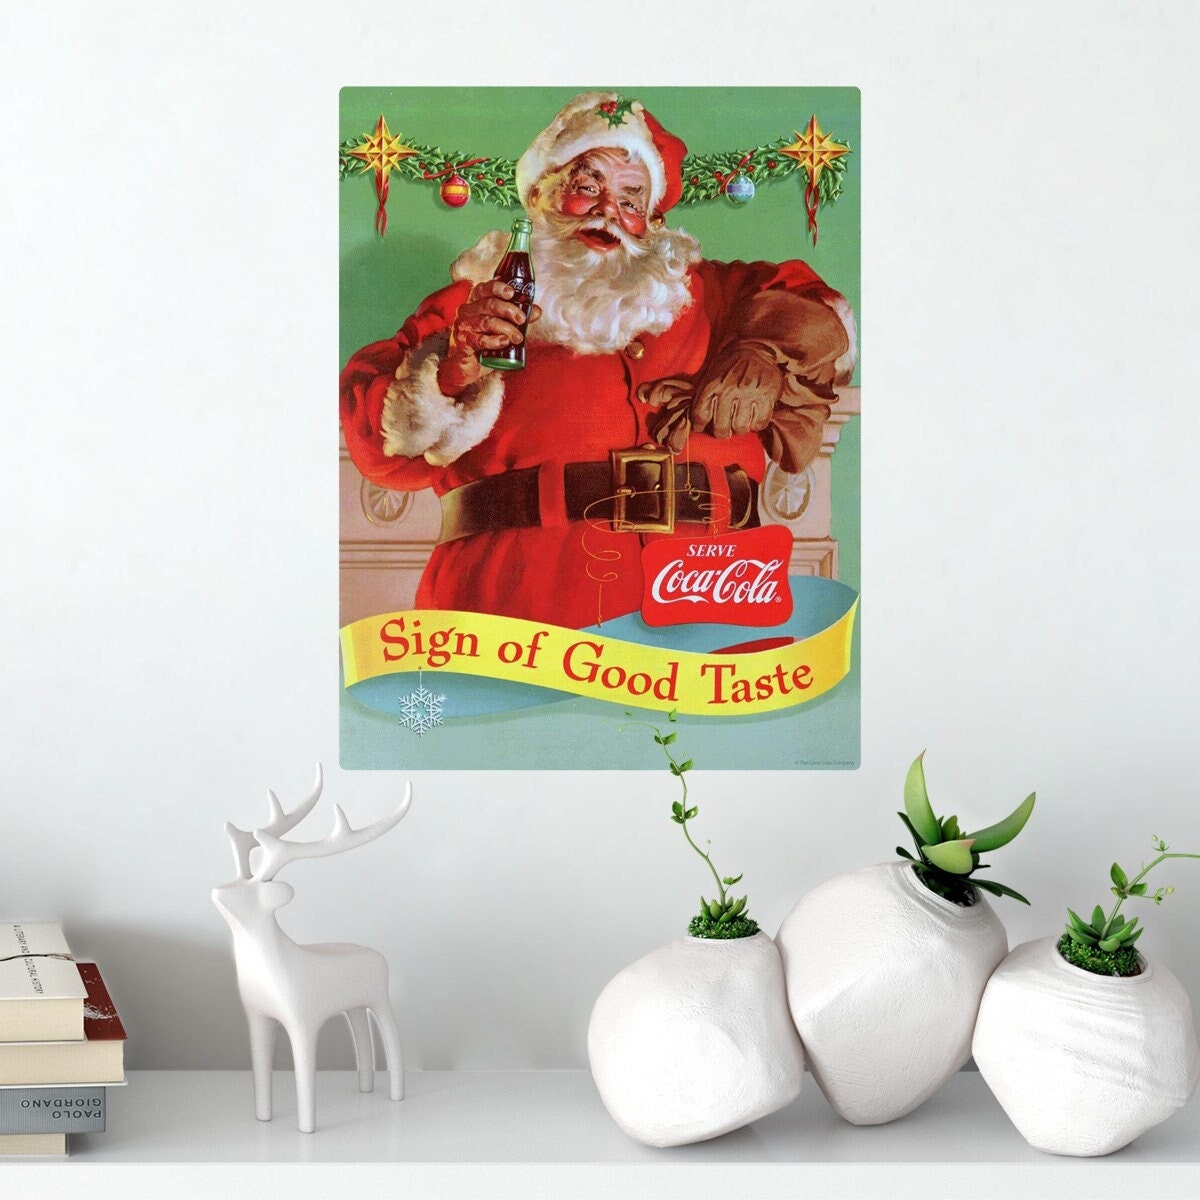 Coca-Cola Santa For Me Wall Decal 24 x 11 Vintage Style Kitchen Decor Graphic 